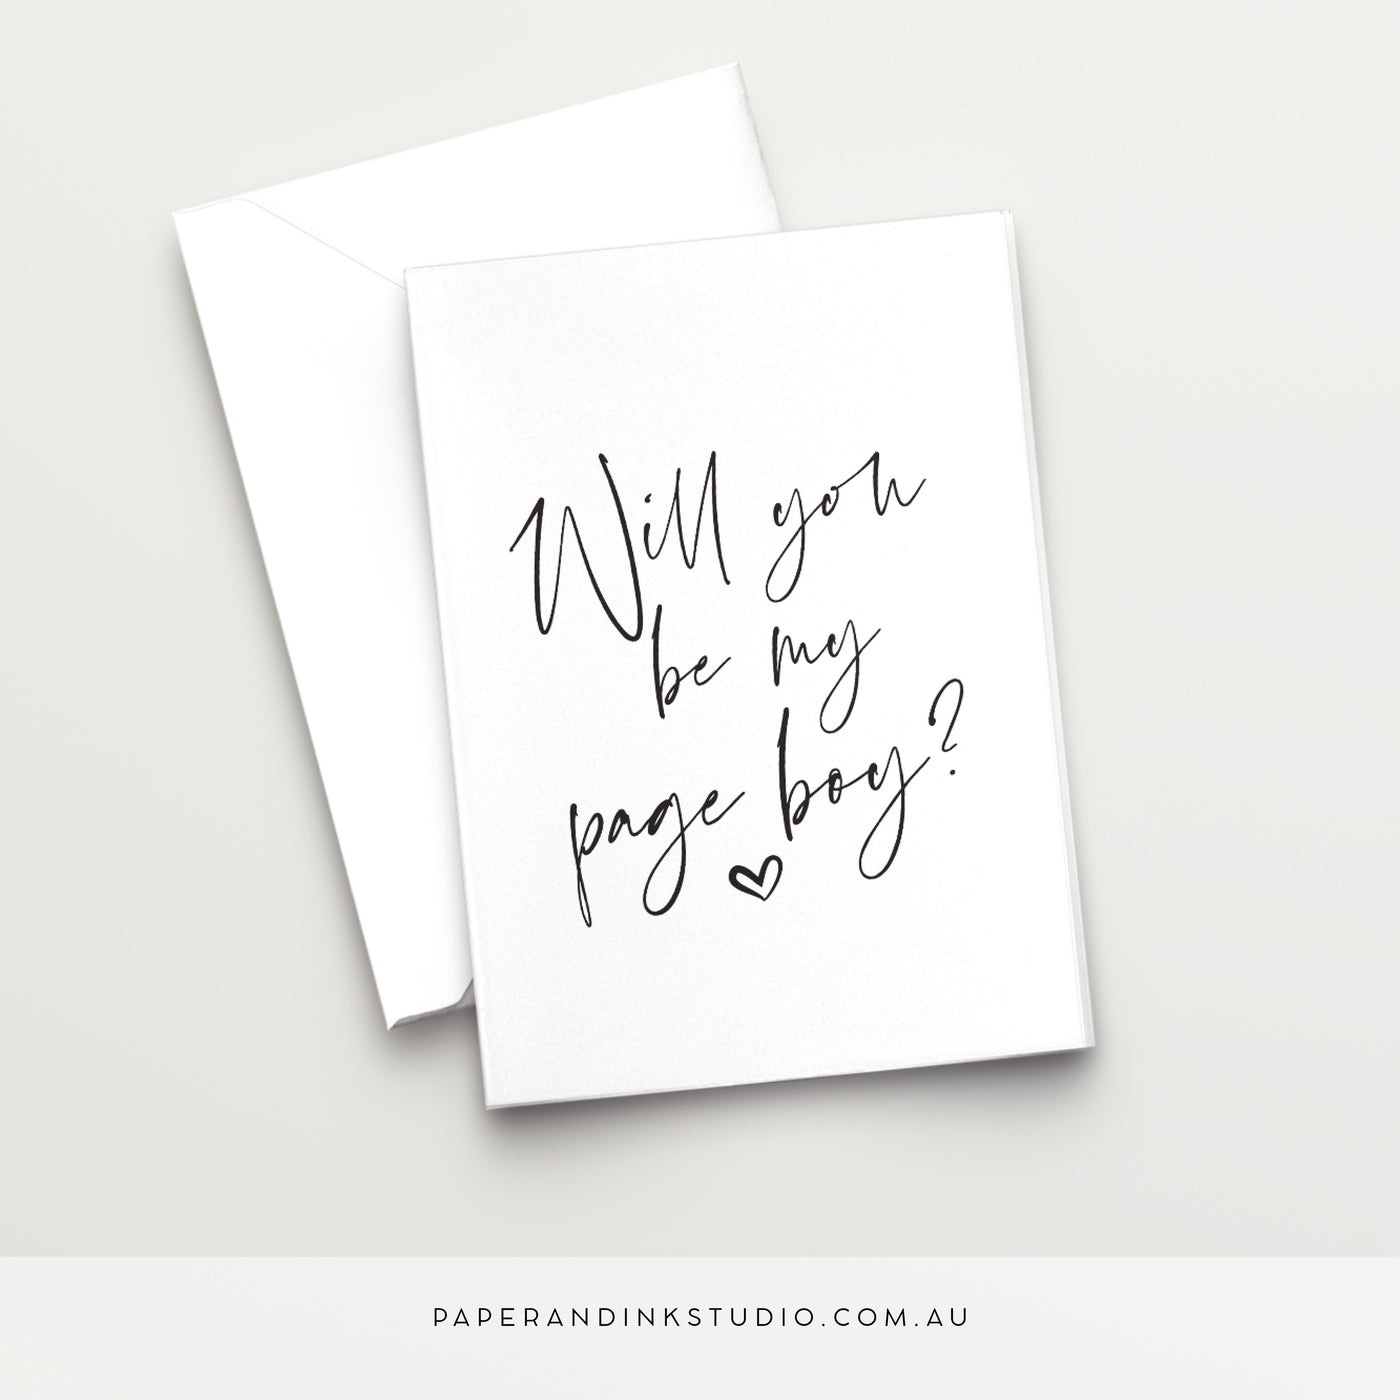 A white folded wedding or best woman card in a design called Thorne with black writing that says will you be my pageboy, asking your nephew, child, friend's child or godchild to be your page boy at your wedding.